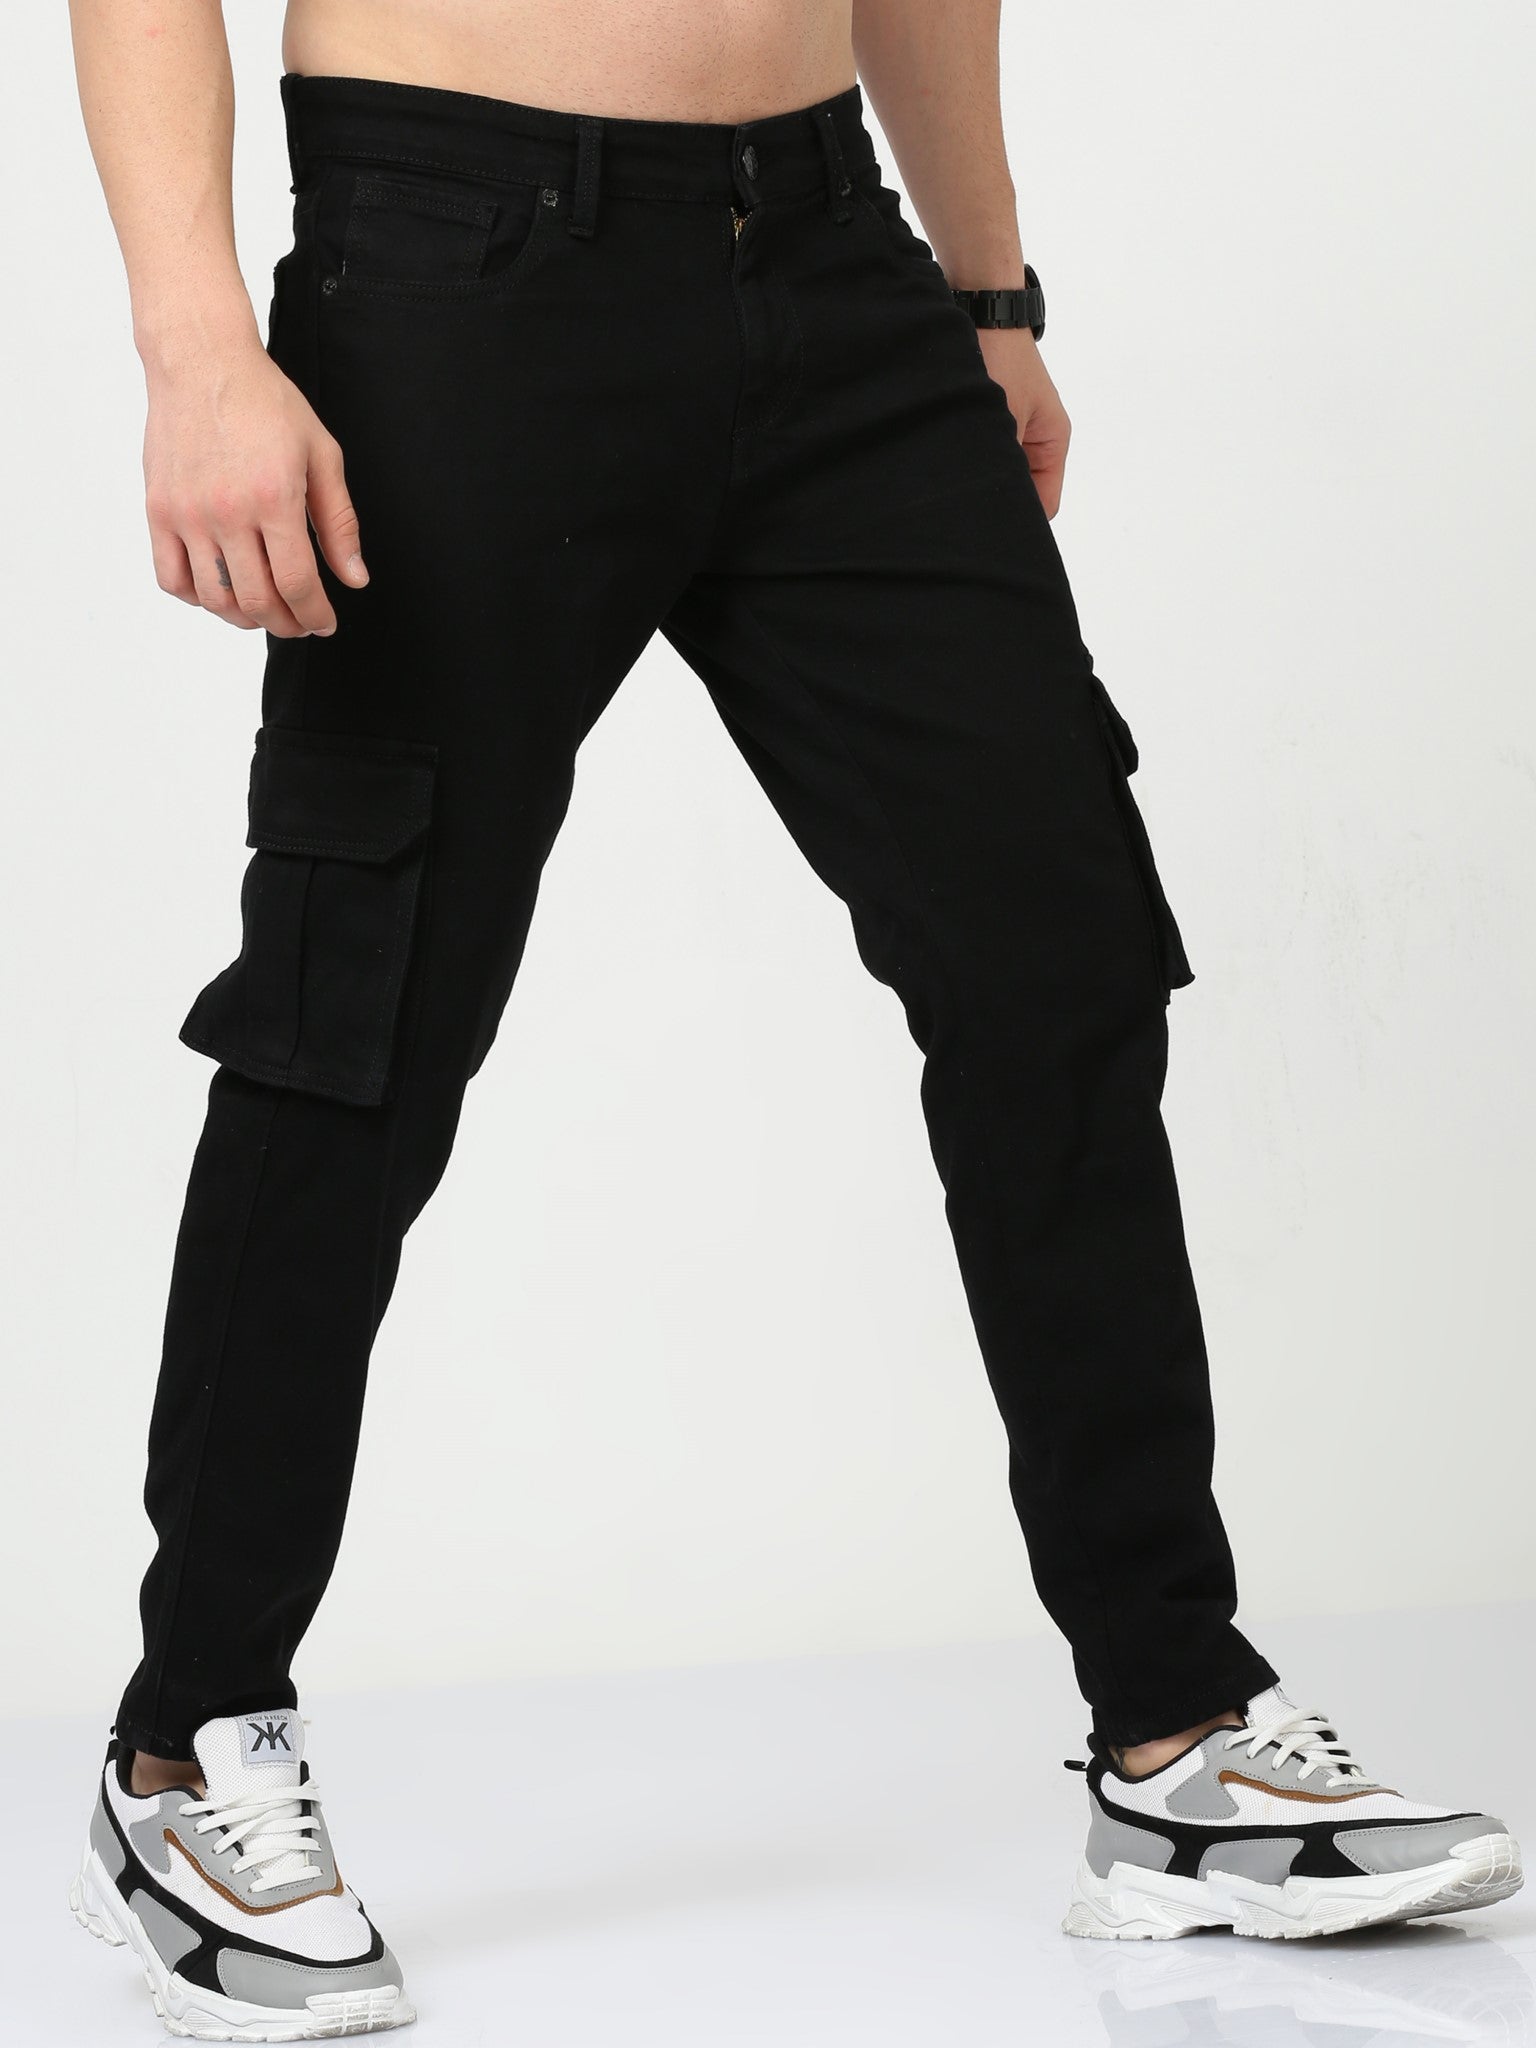 Black Panther Cargo Jeans